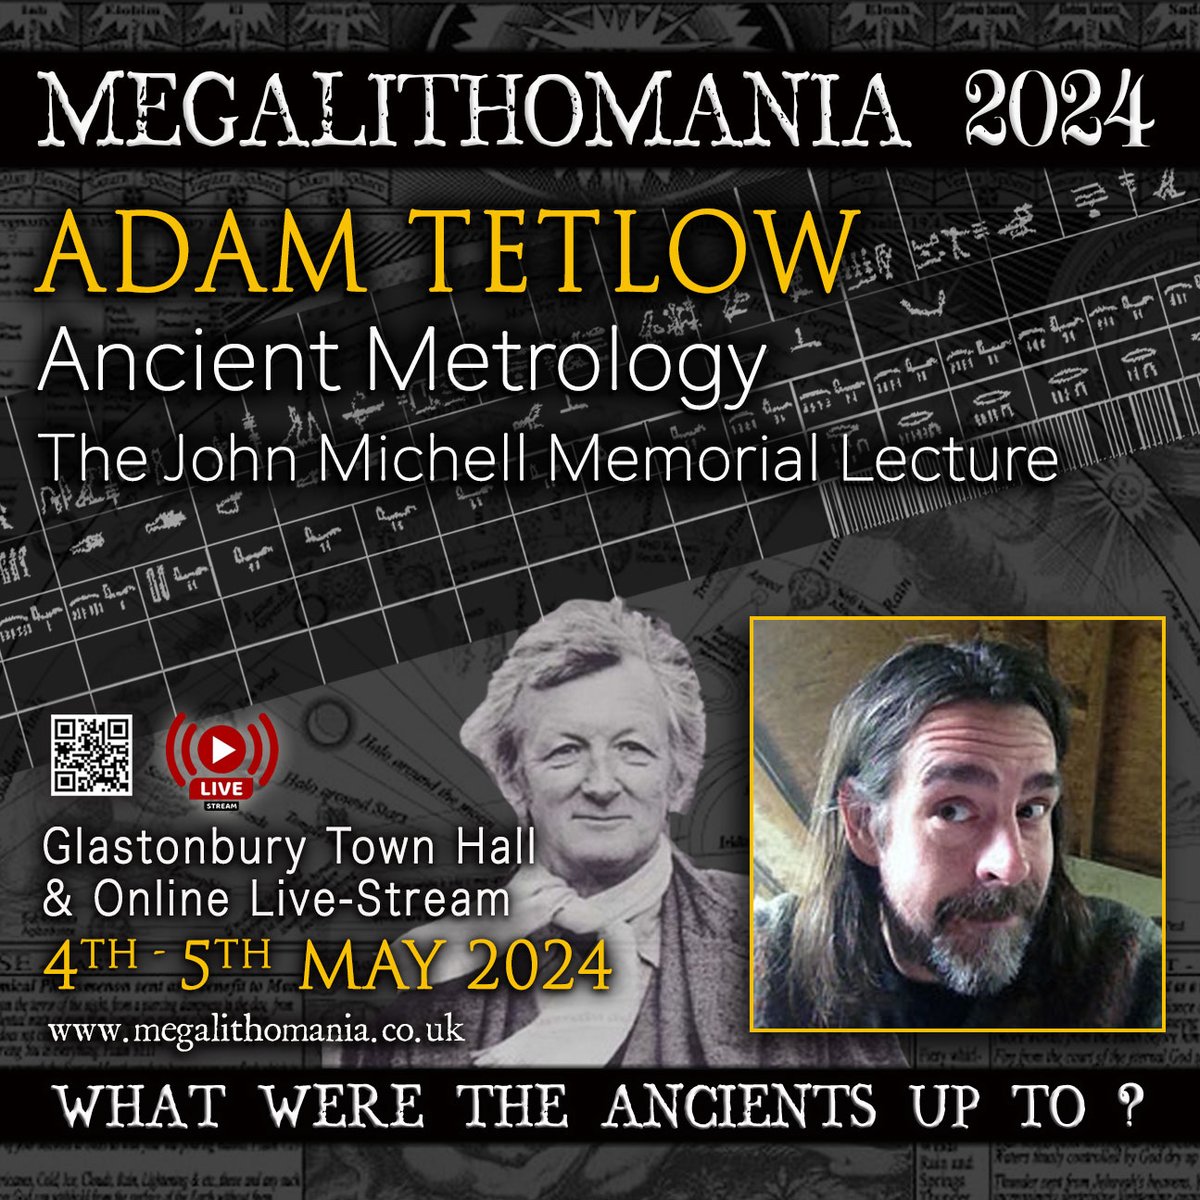 ADAM TETLOW - Ancient Metrology: From the Ridiculous to the Sublime - The John Michell Memorial Lecture introduced by Christine Rhone, at the Megalithomania Conference 2024, Glastonbury, 4th - 5th May + live-stream megalithomania.co.uk/booking.html #megalithomania #conference #Livestream